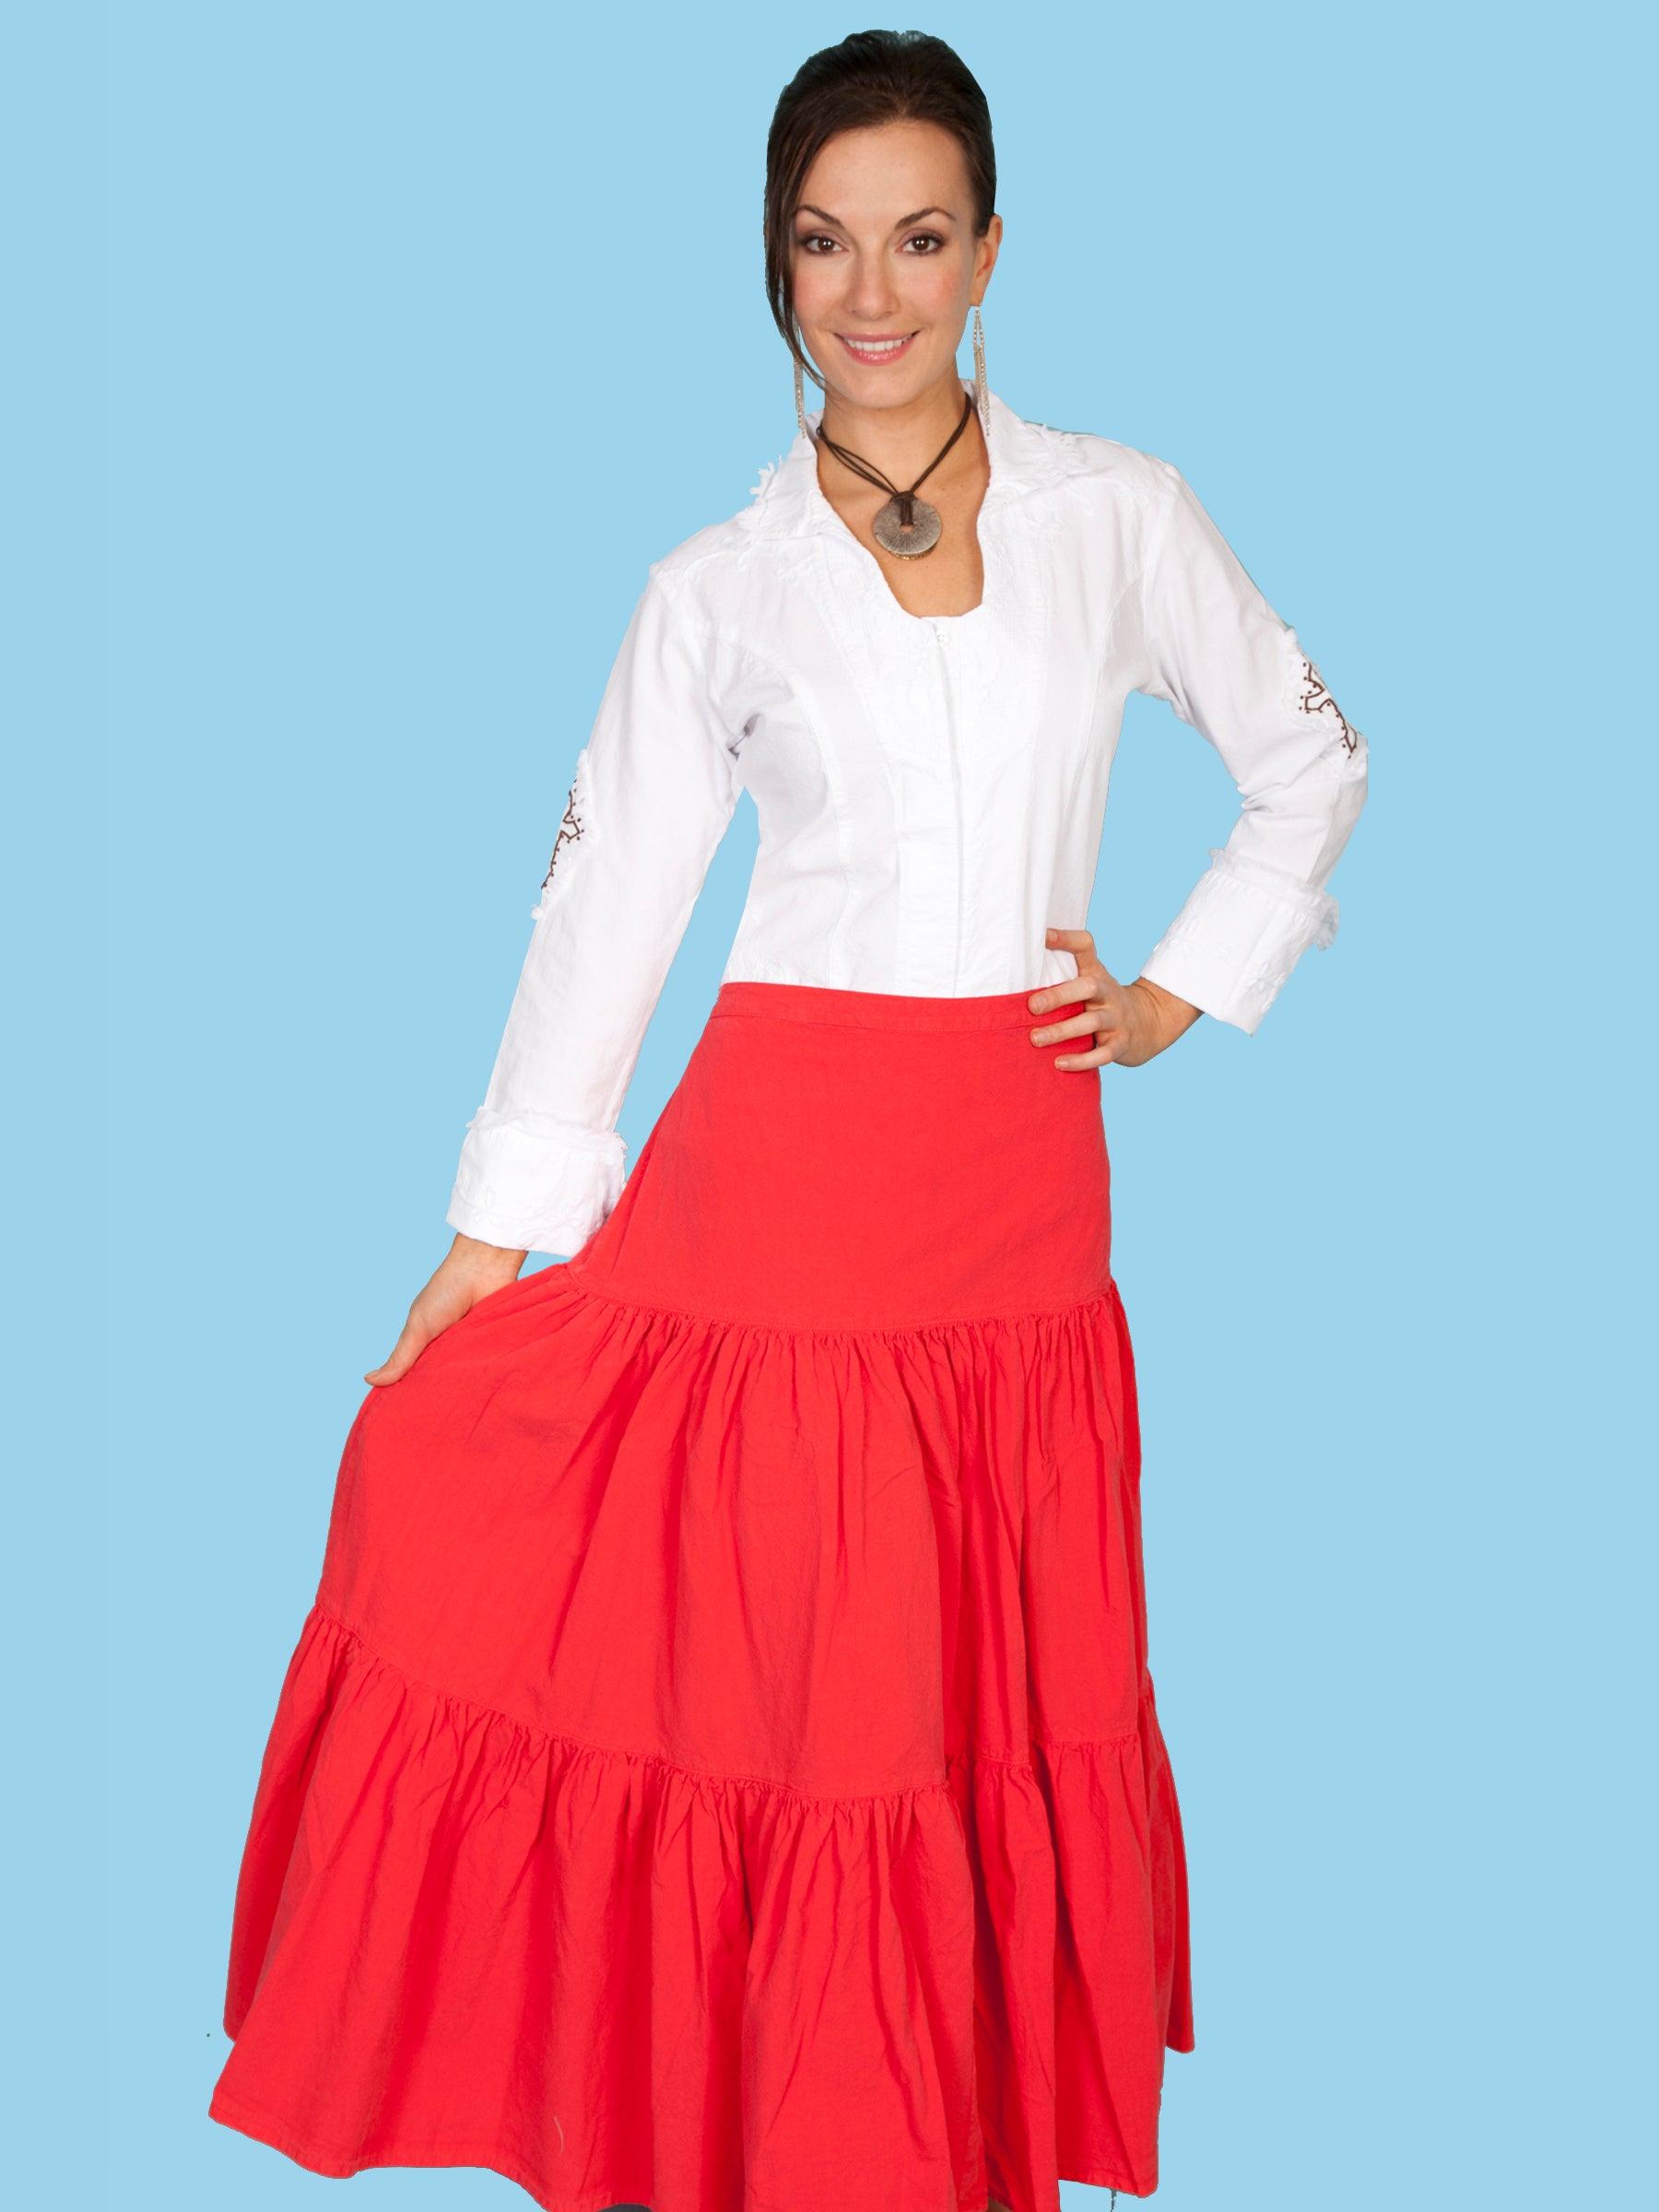 Scully VERMILION 3 TIER SKIRT - Flyclothing LLC